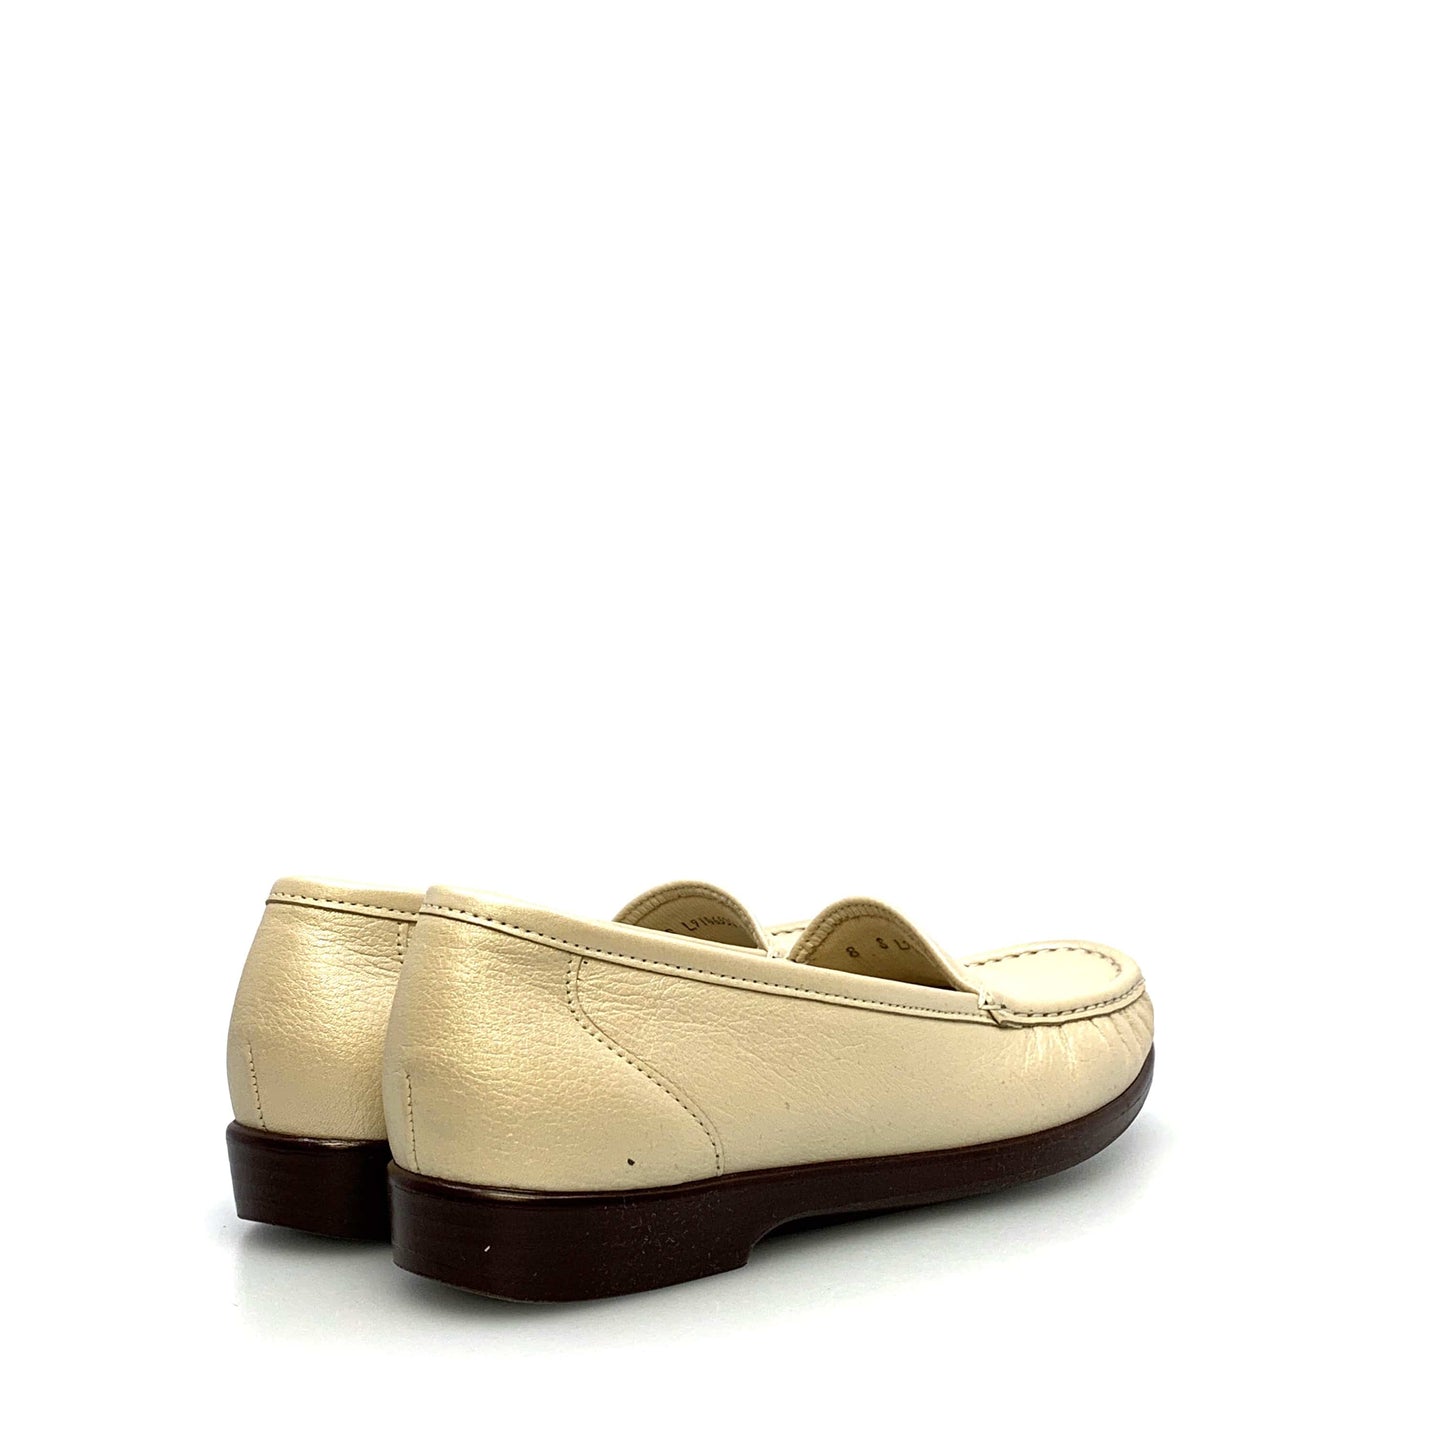 SAS Womens Size 8S Leather Loafers Ivory Shoes Tripad Comfort Walking